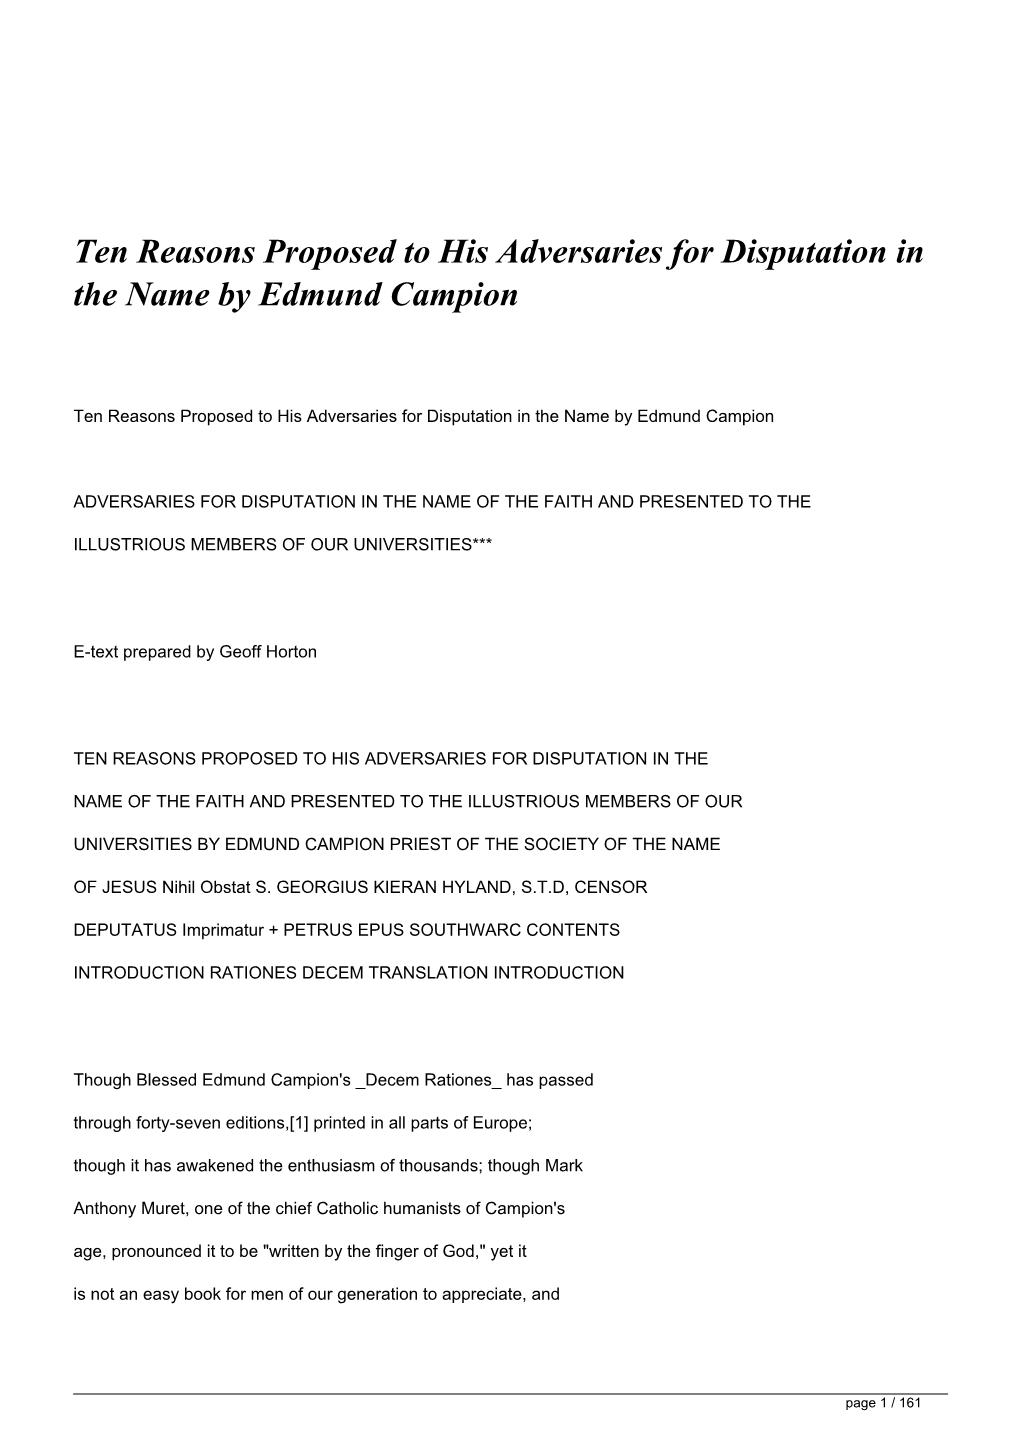 &lt;H1&gt;Ten Reasons Proposed to His Adversaries for Disputation in The